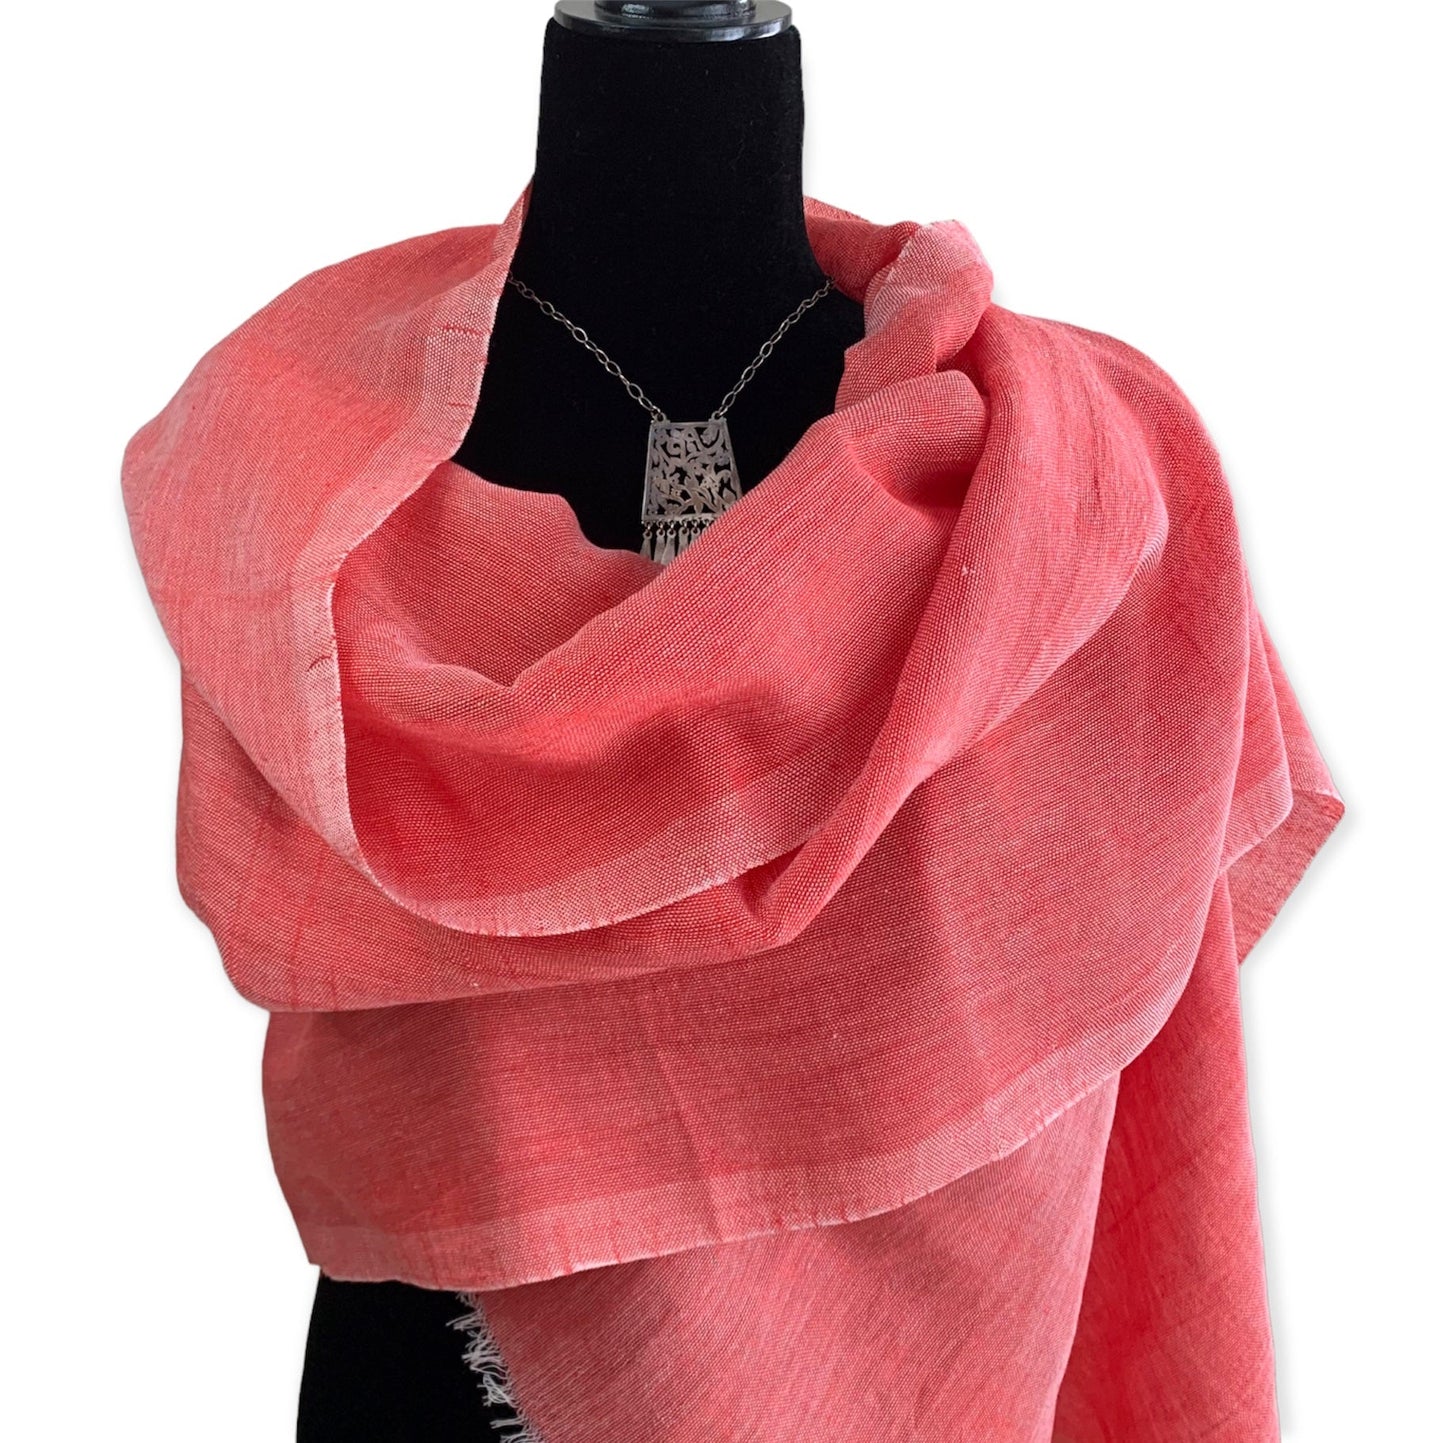 Handwoven Linen Scarf - Scarlet Red